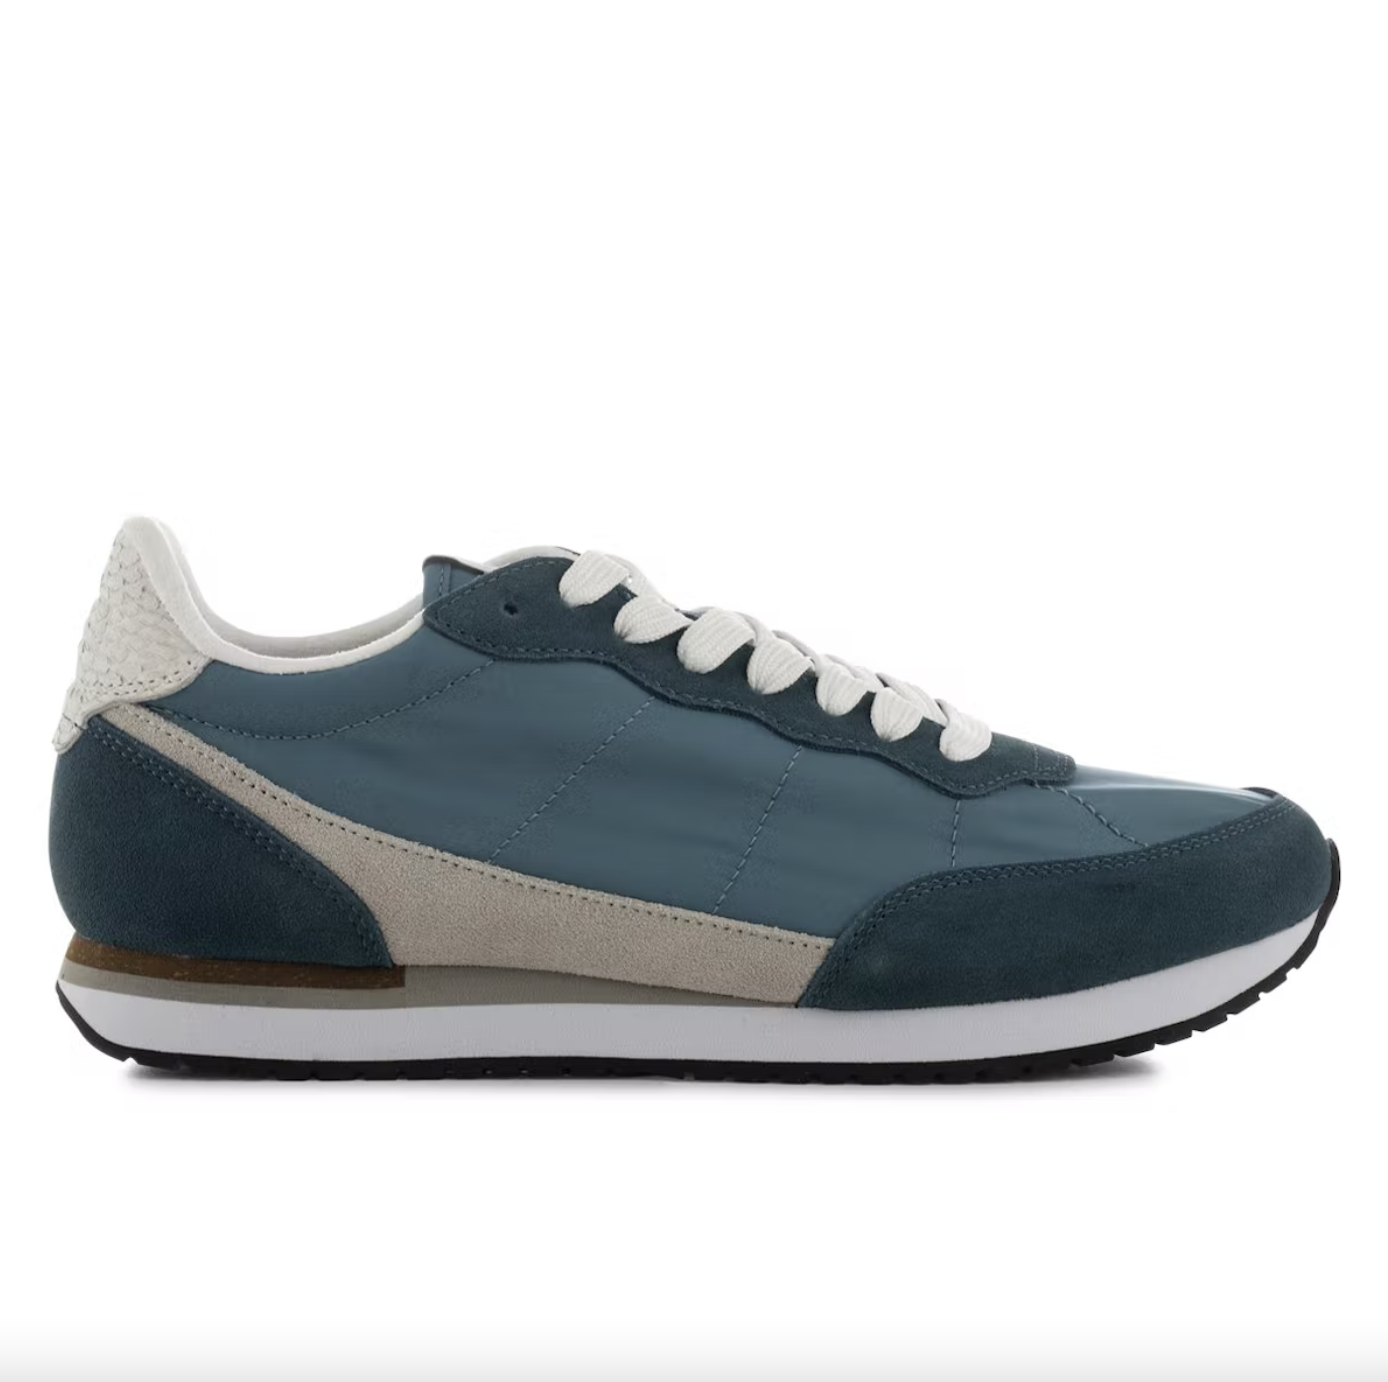 Save Up To 45% On Men's Footwear At Huckberry - BroBible